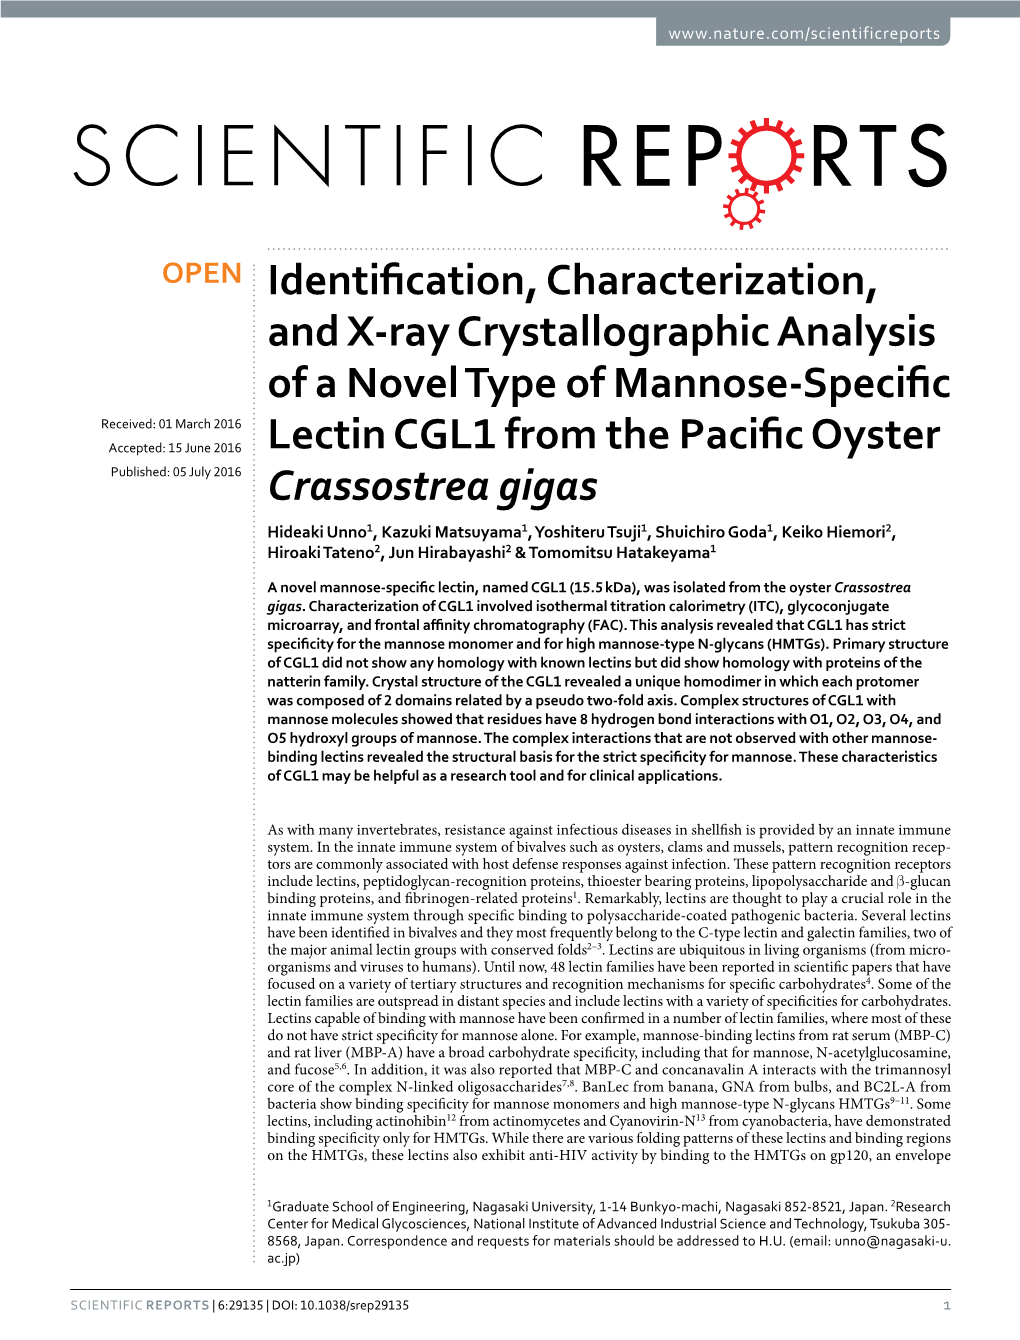 Identification, Characterization, and X-Ray Crystallographic Analysis of A